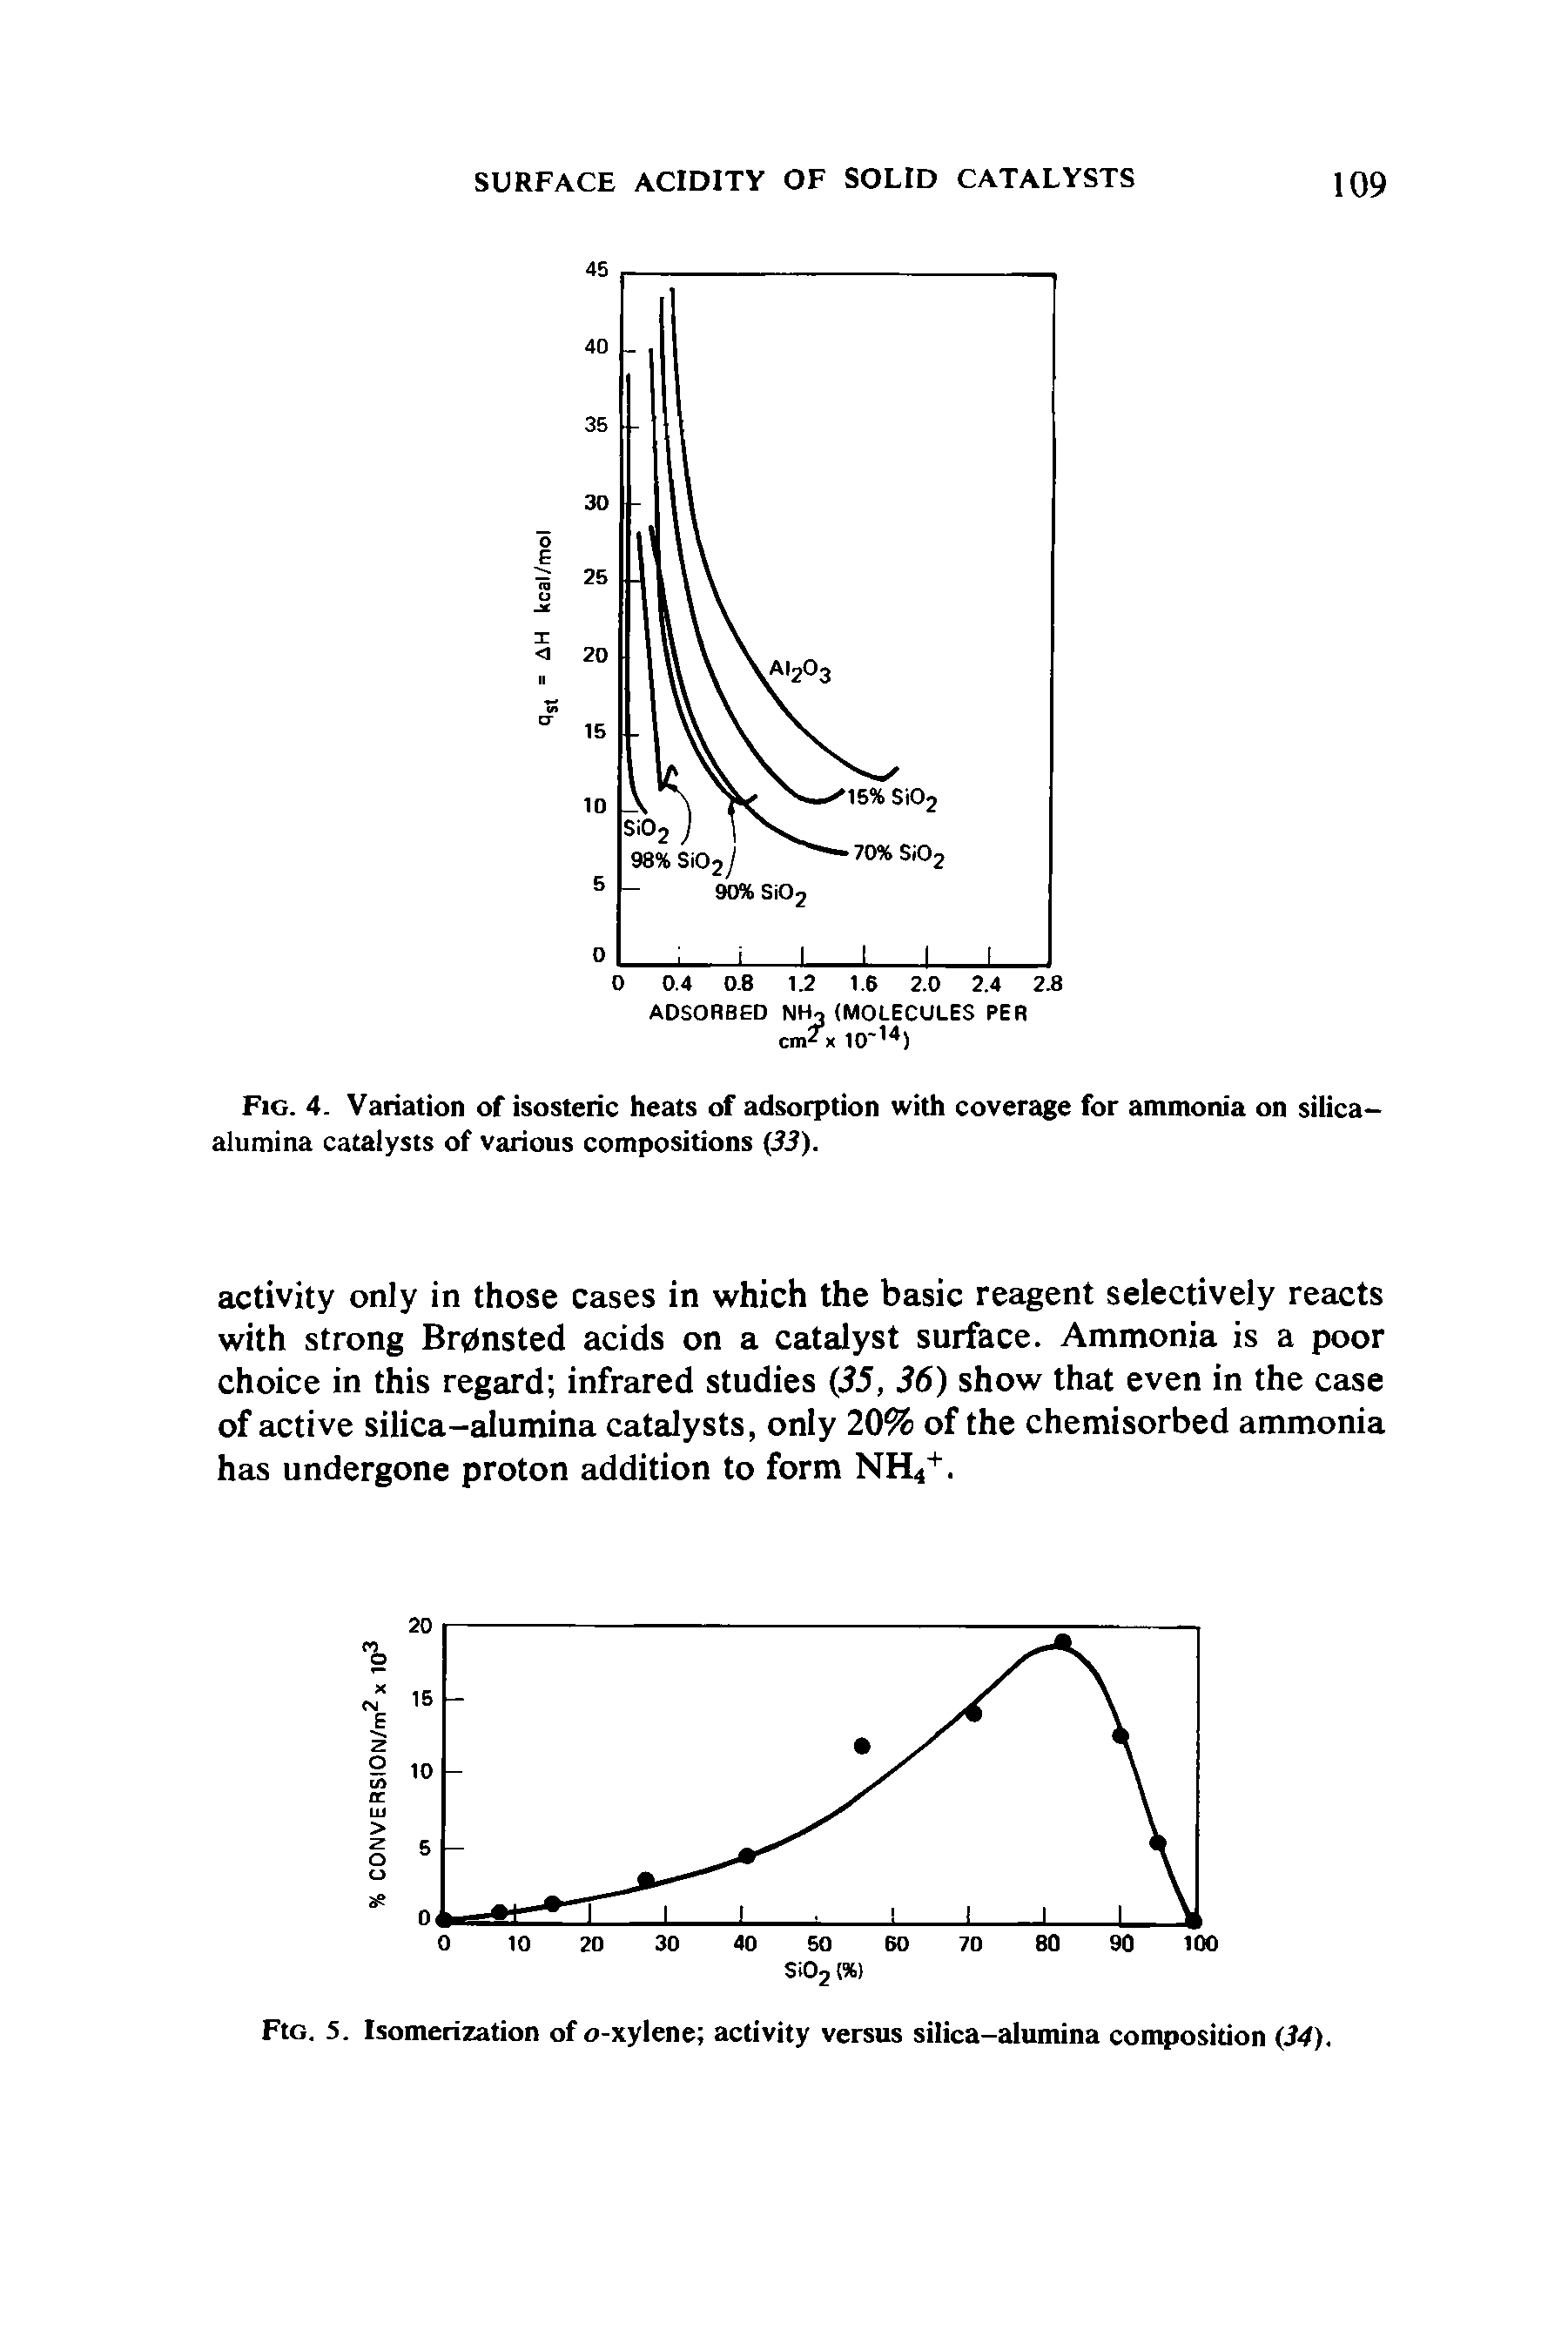 Fig. 4. Variation of isosteric heats of adsorption with coverage for ammonia on silica-alumina catalysts of various compositions 33).